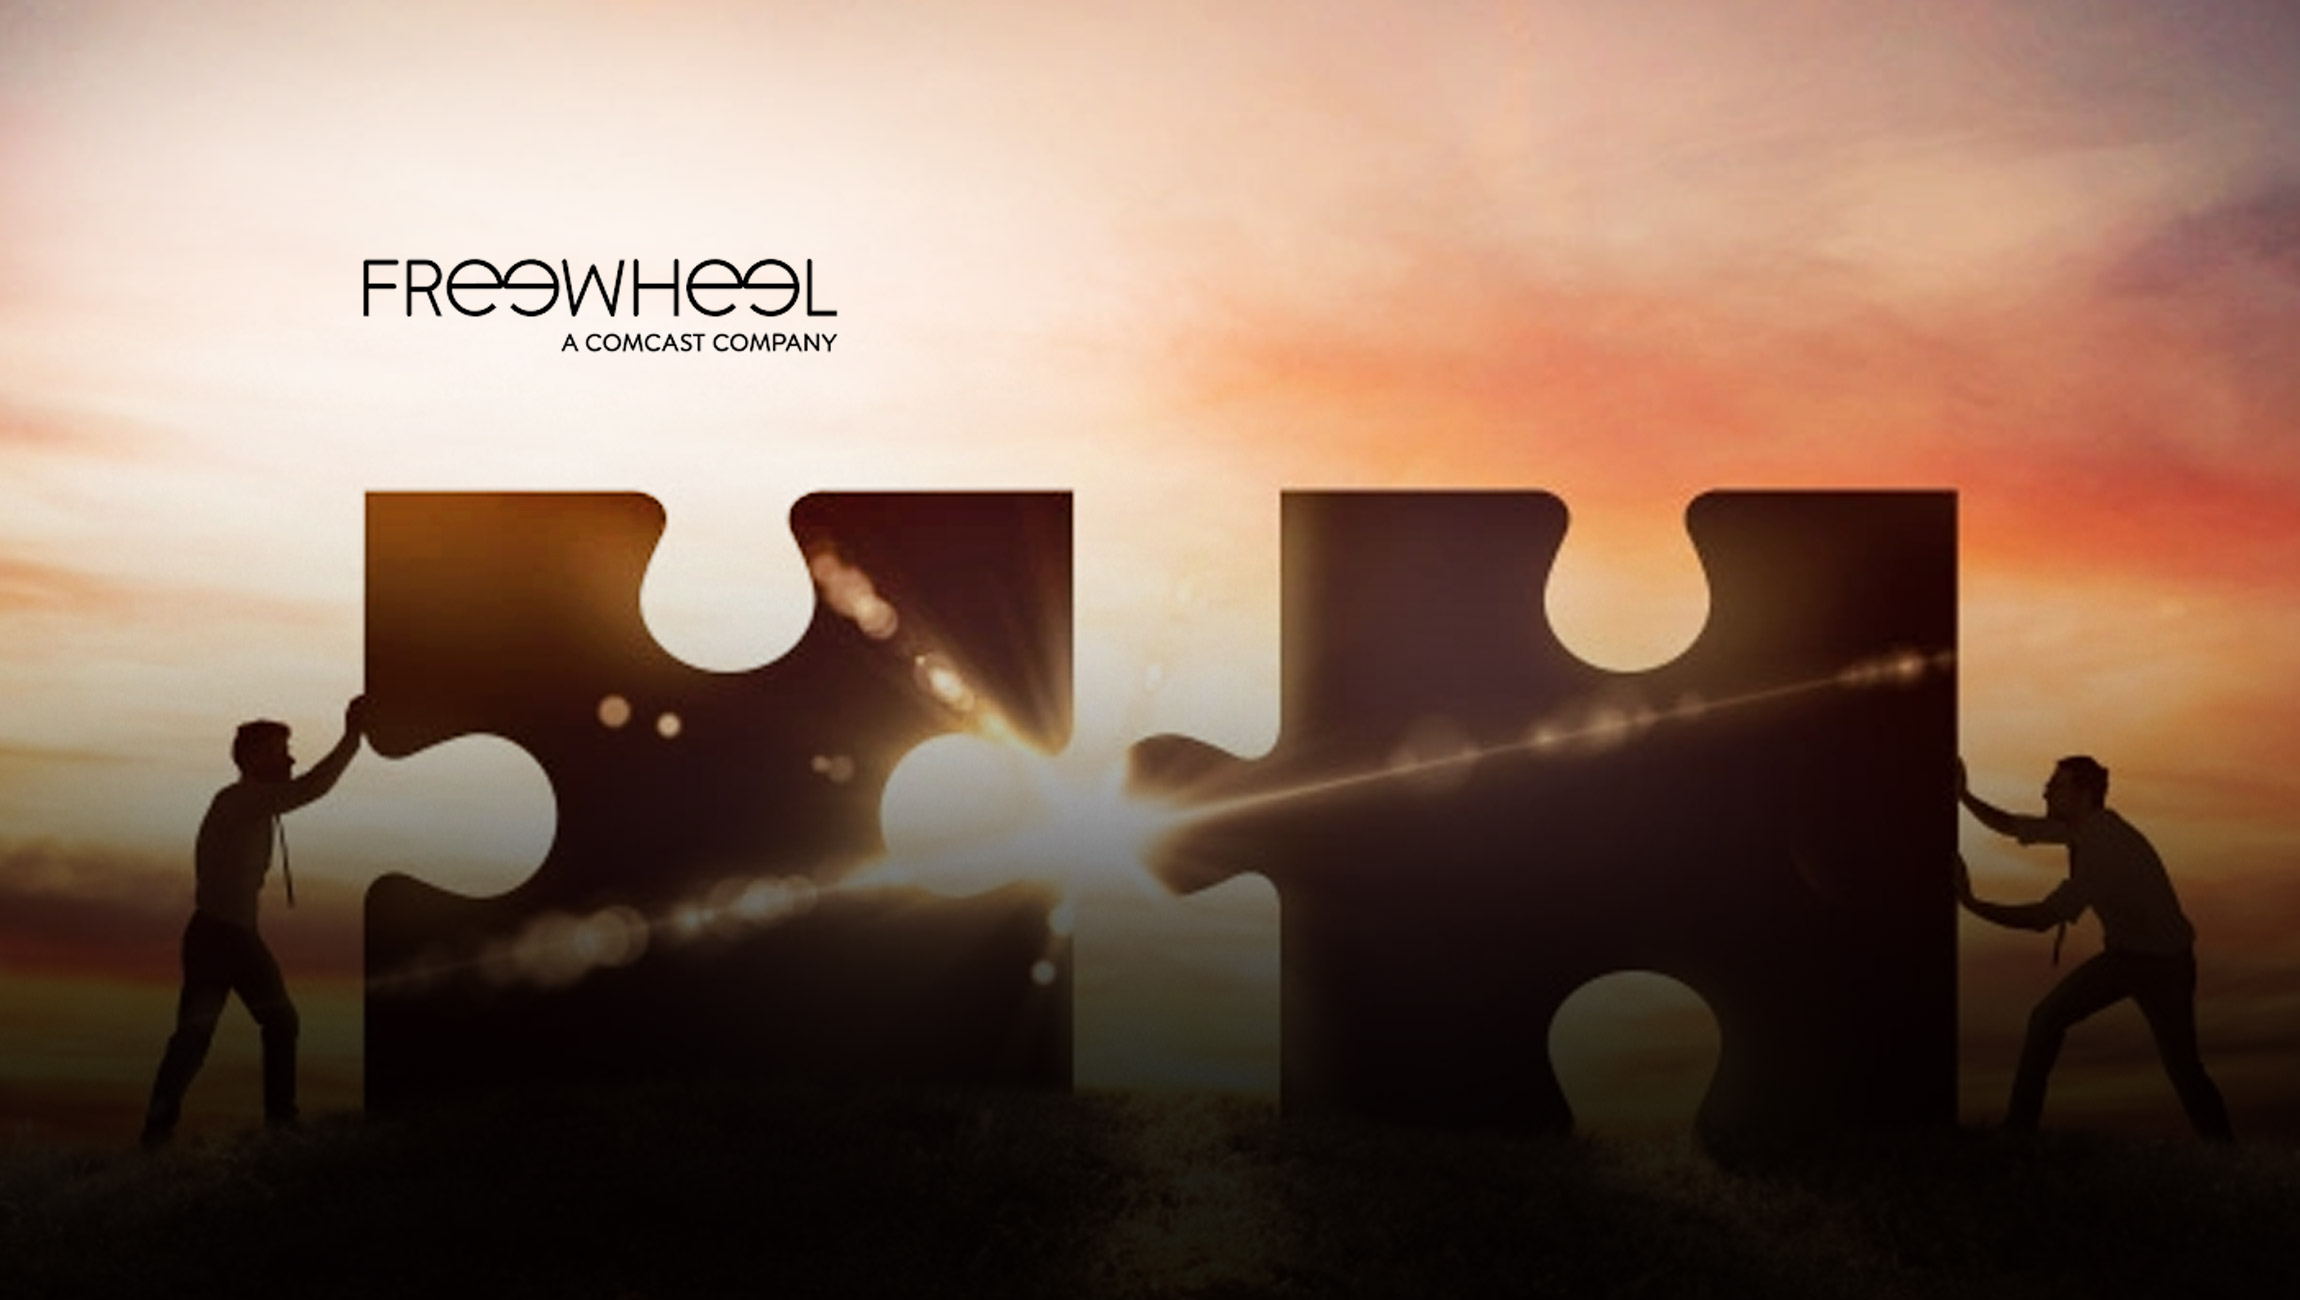 FreeWheel to Acquire Ad Tech Leader Beeswax